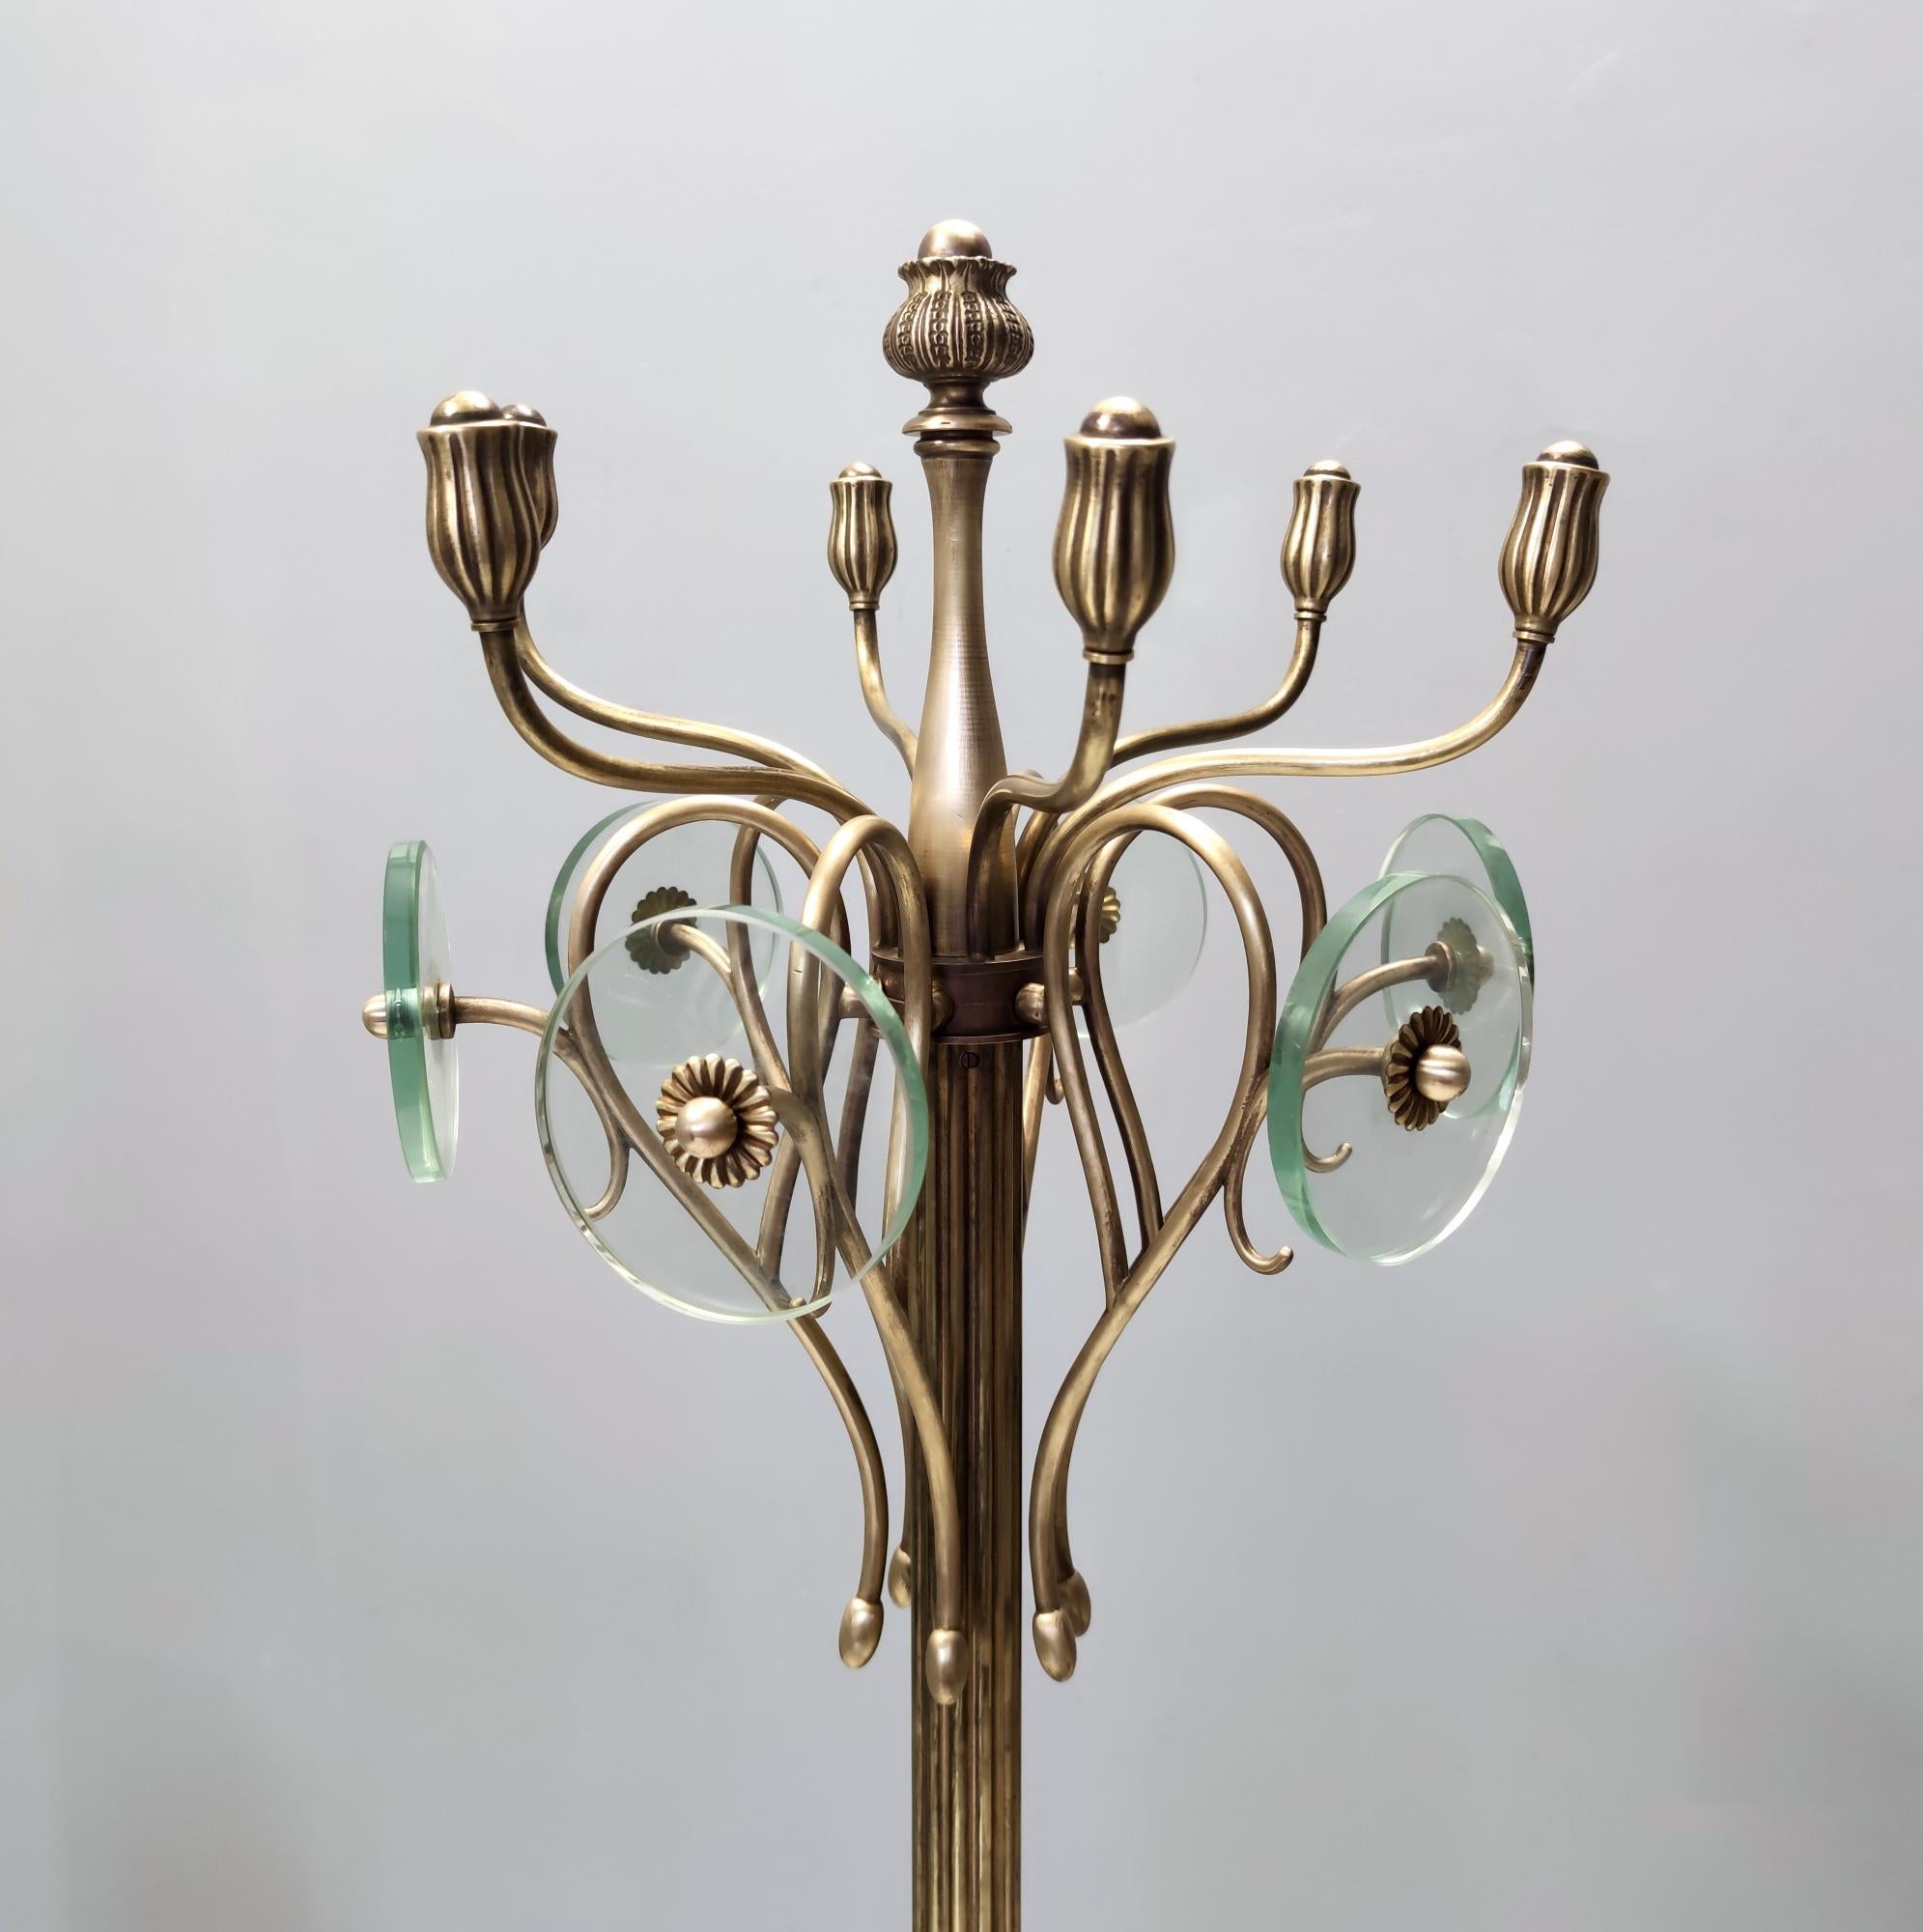 Vintage Revolving Brass and Glass Coat Rack Ascribable to Fontana Arte, Italy For Sale 1